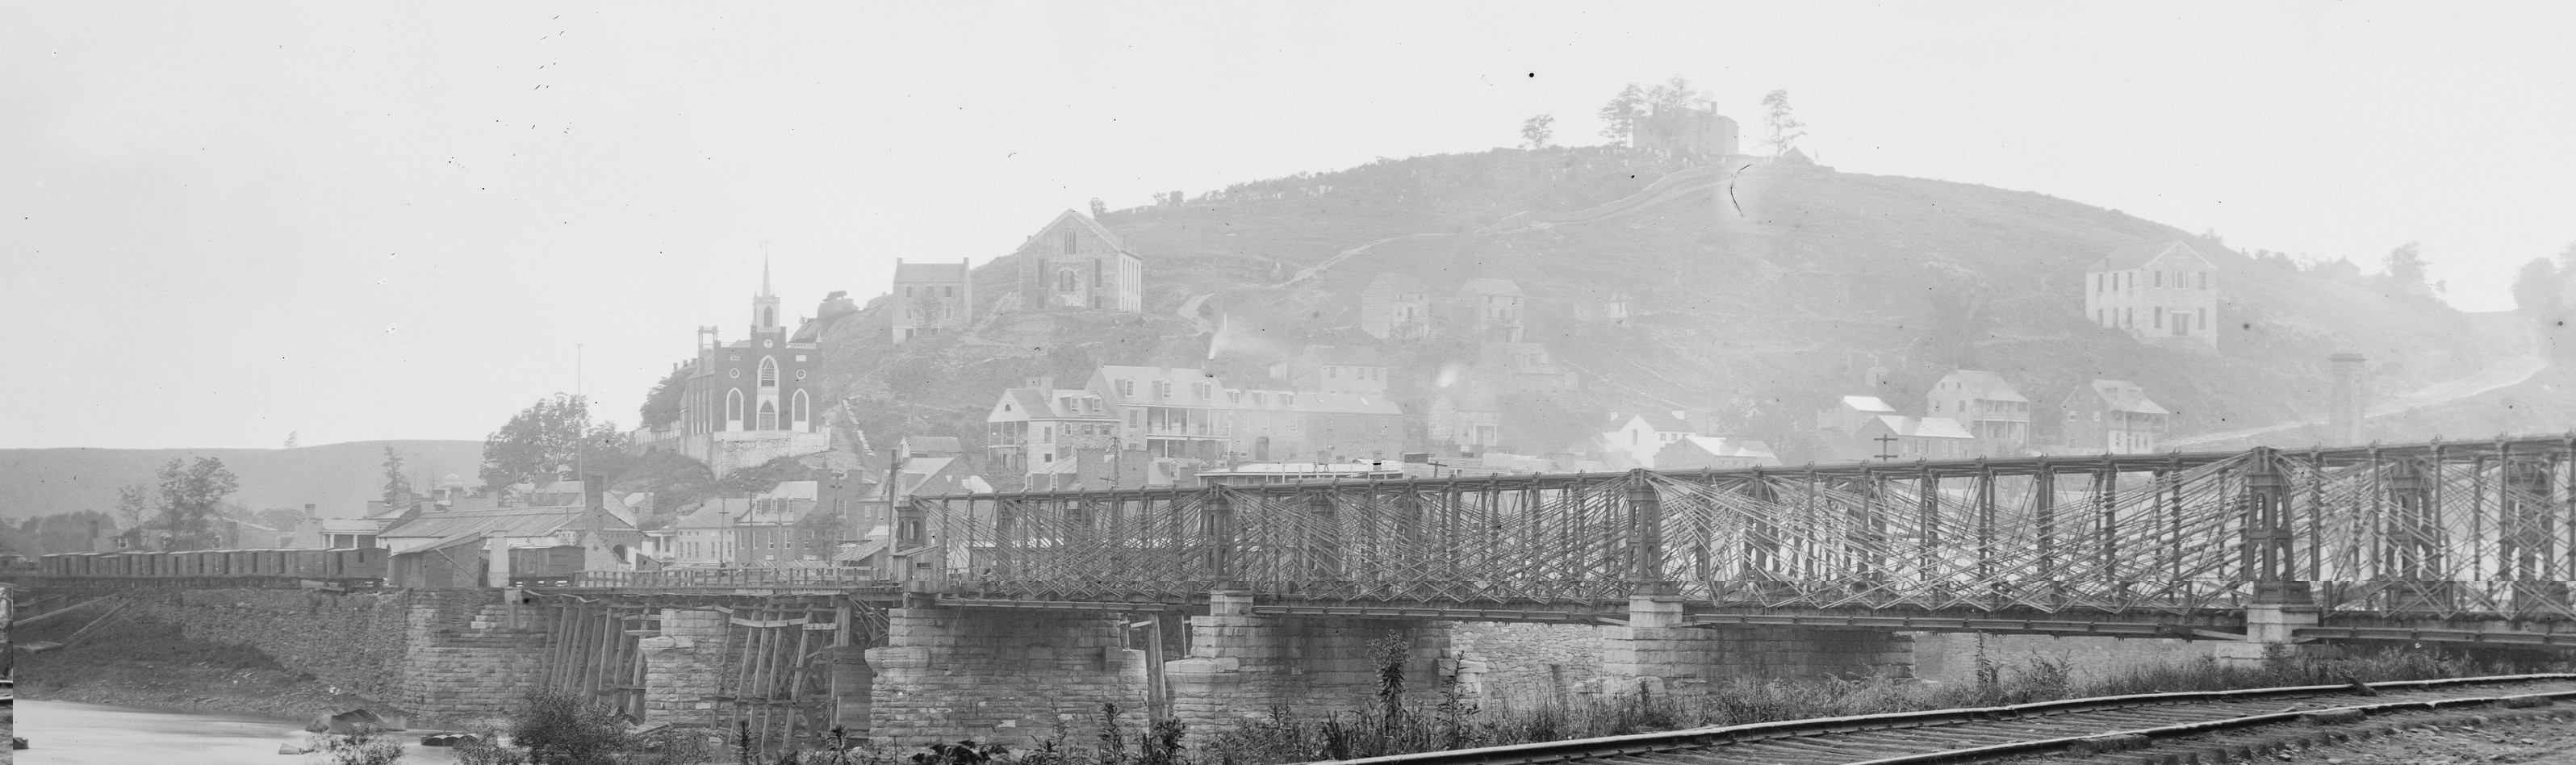 1862 Harpers Ferry panorama